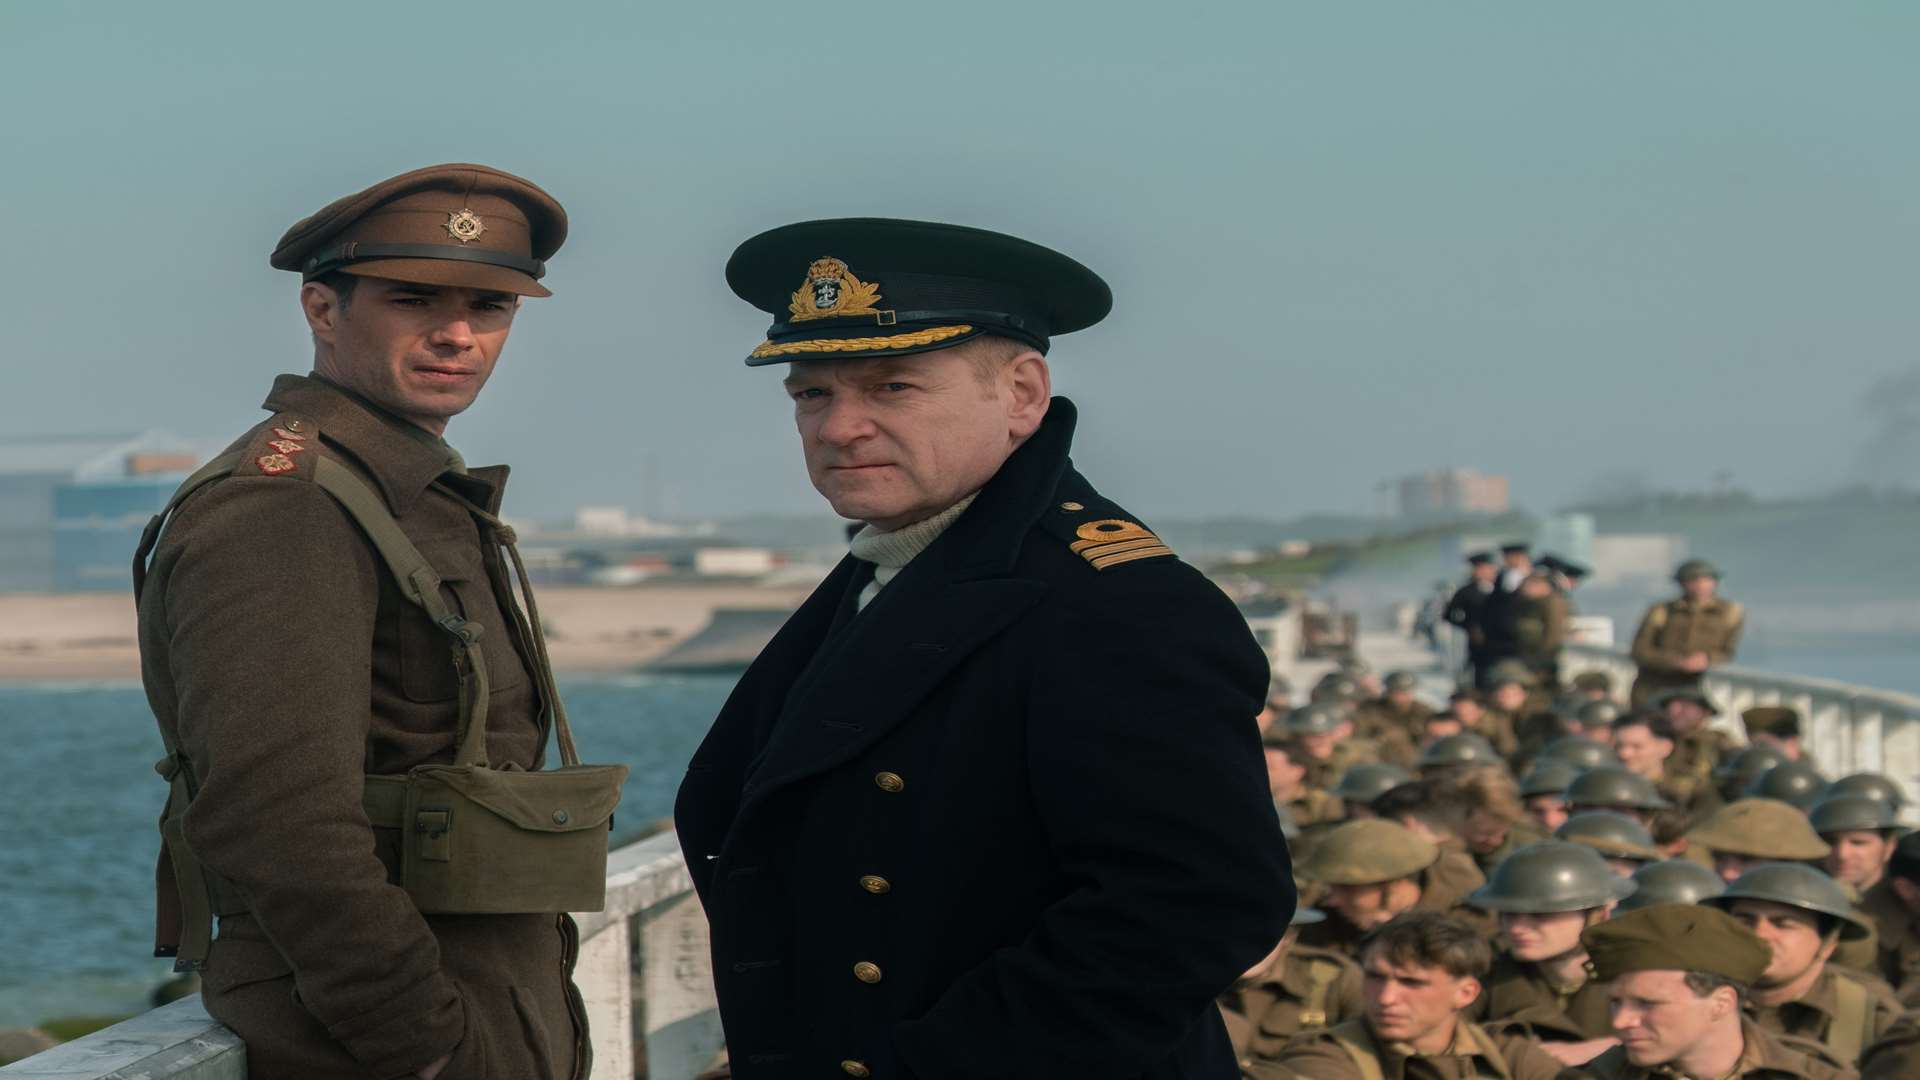 The film Dunkirk stars James D'Arcy and Kenneth Branagh